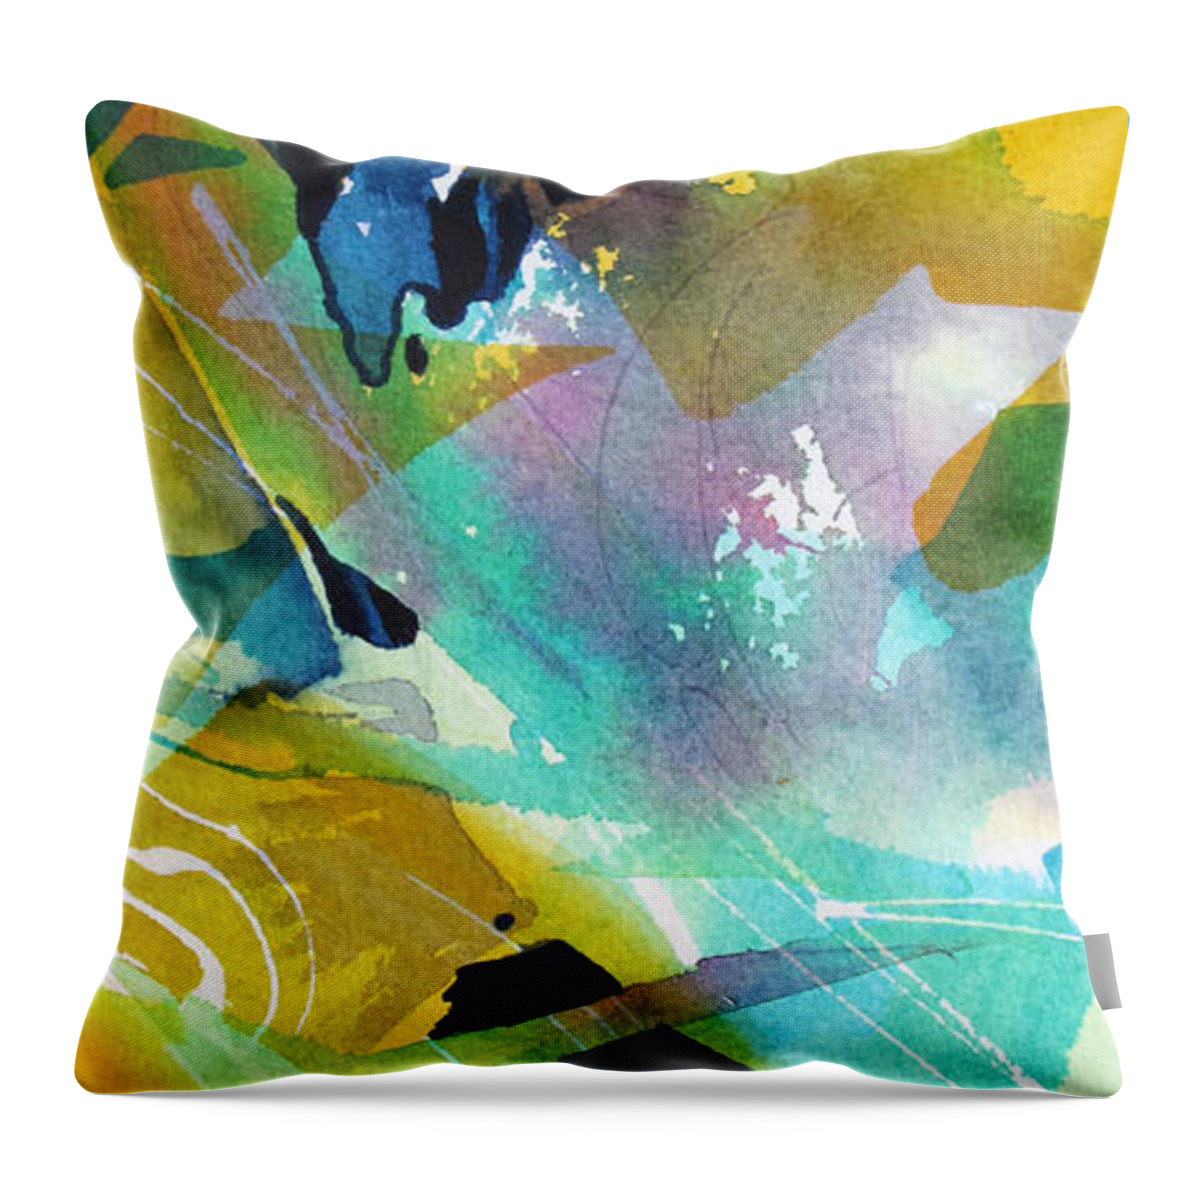 Abstract Throw Pillow featuring the painting Caribbean Rhythm by Rae Andrews